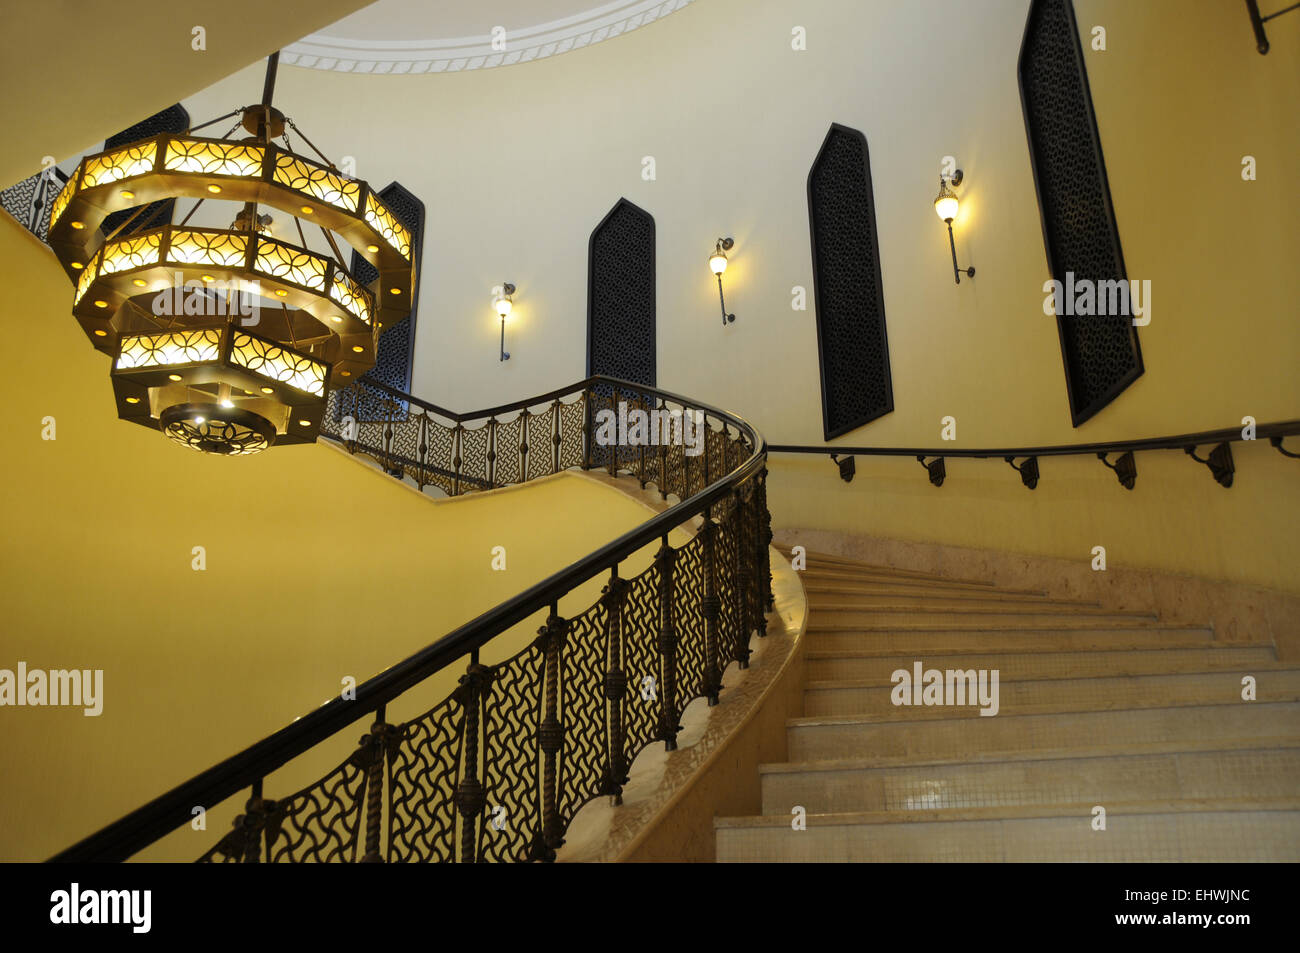 The Grand staircase, Sharq Village Hotel, Doha, Qatar. Middle East Stock Photo